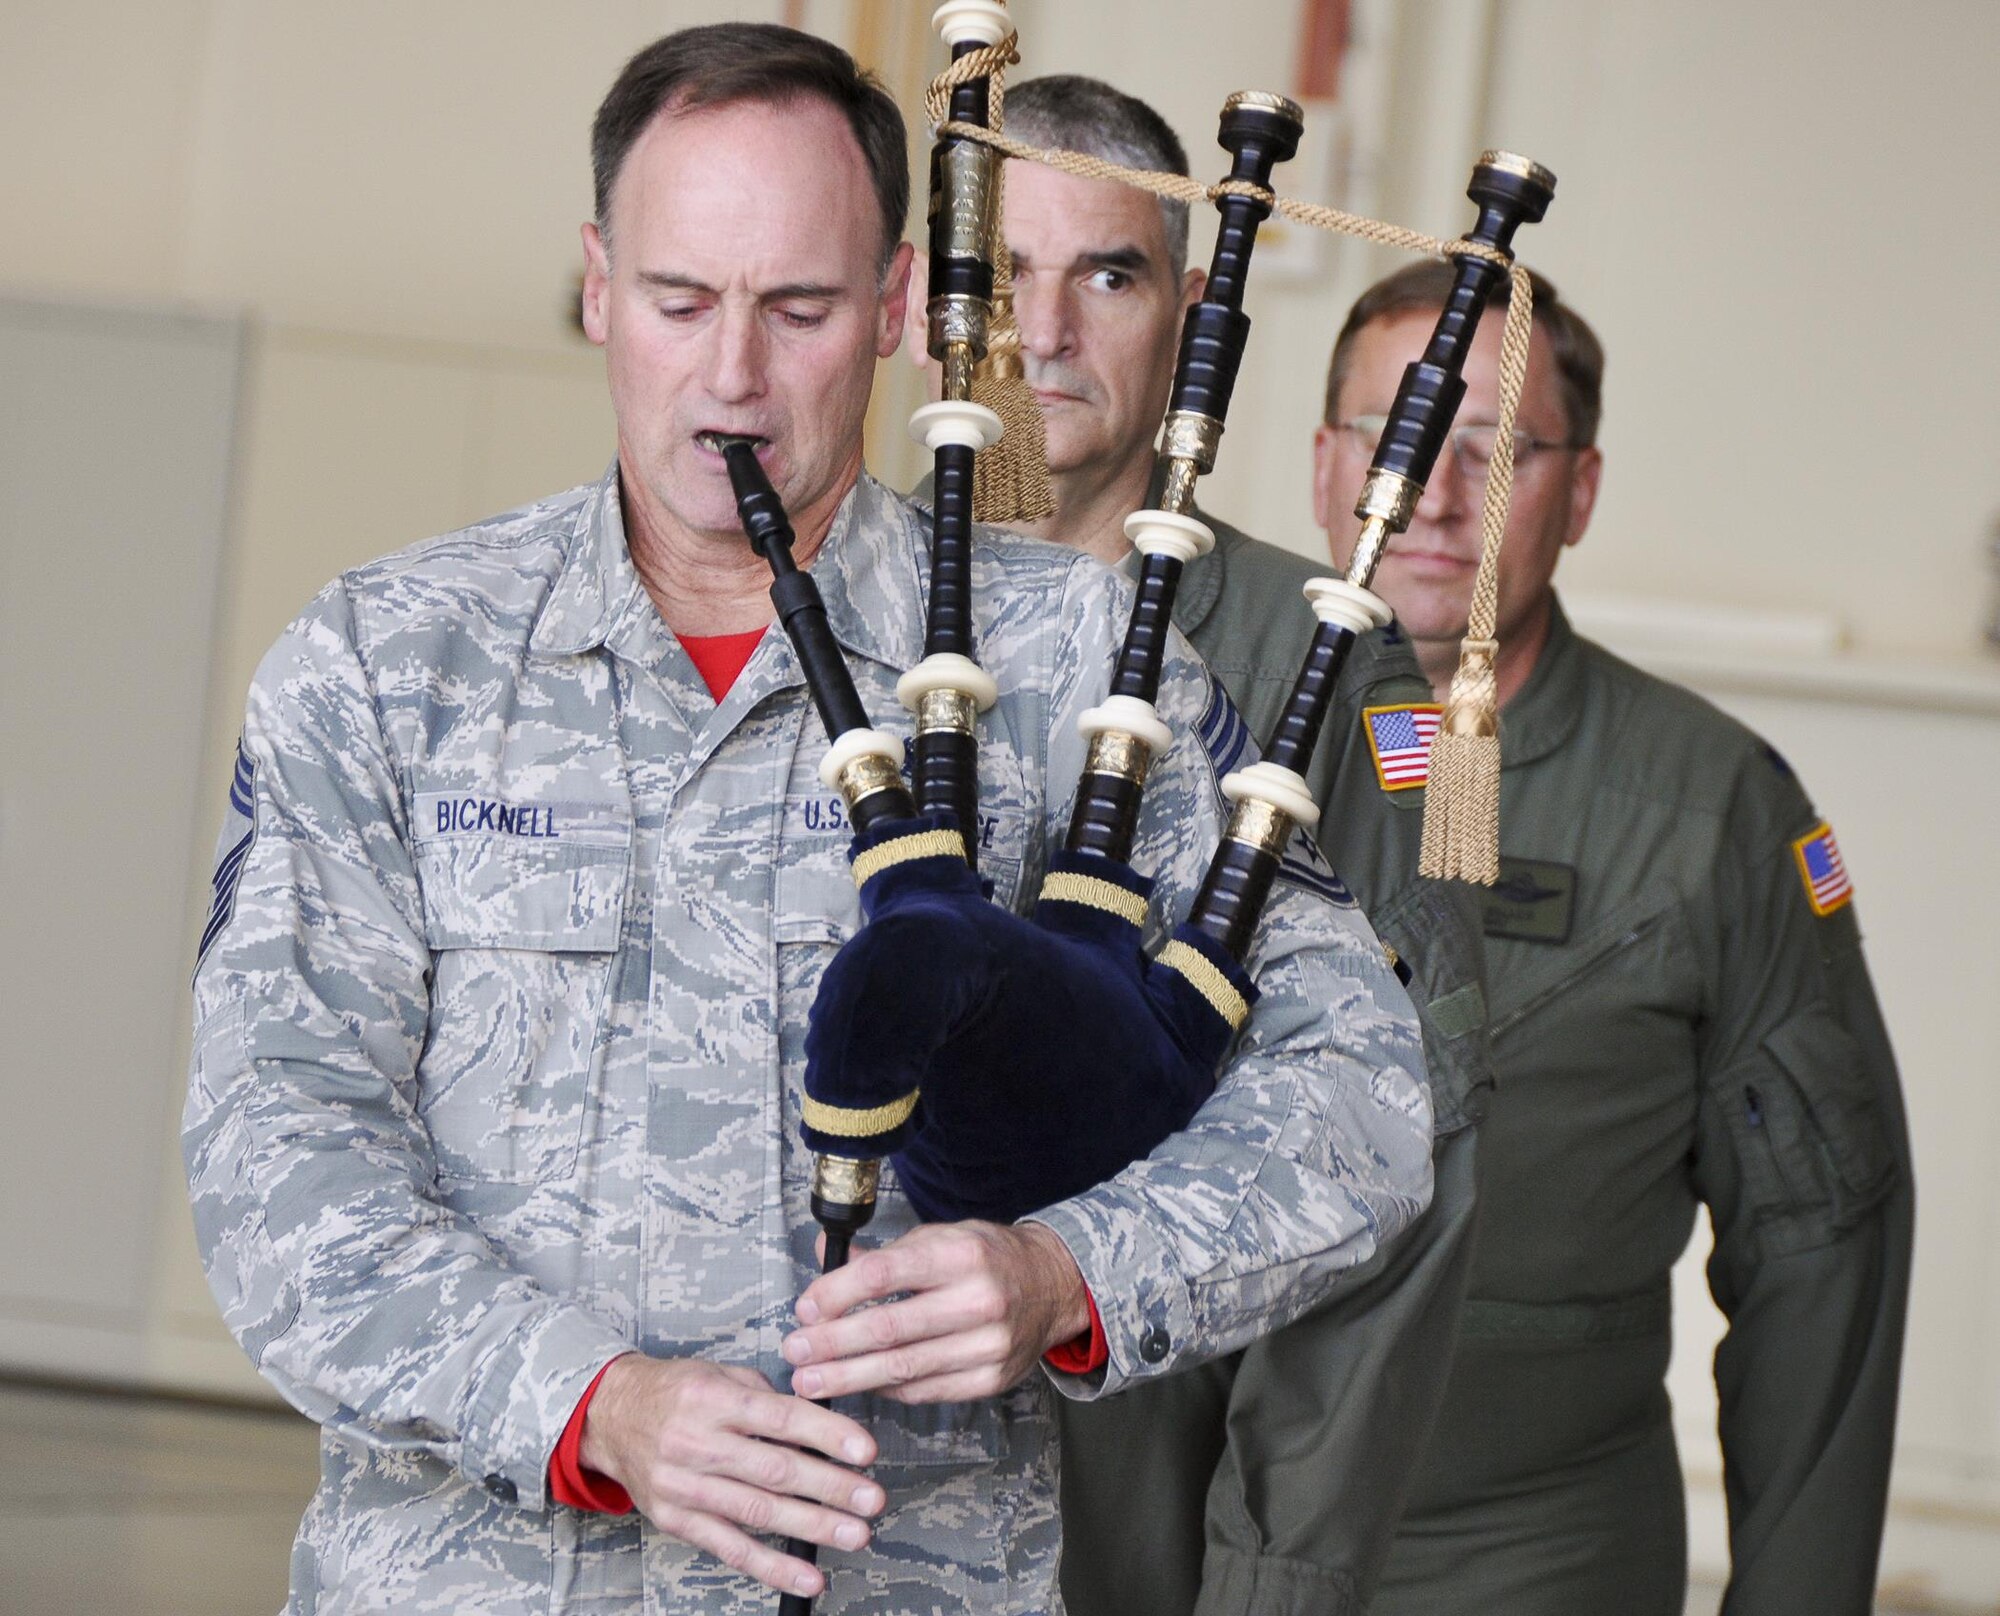 The official party enters to the playing of bagpipes during the retirement ceremony of Lt. Col. Tom Miller, 919th Special Operations Wing, Feb. 4 at Duke Field, Fla. (U.S. Air Force photo/Dan Neely)